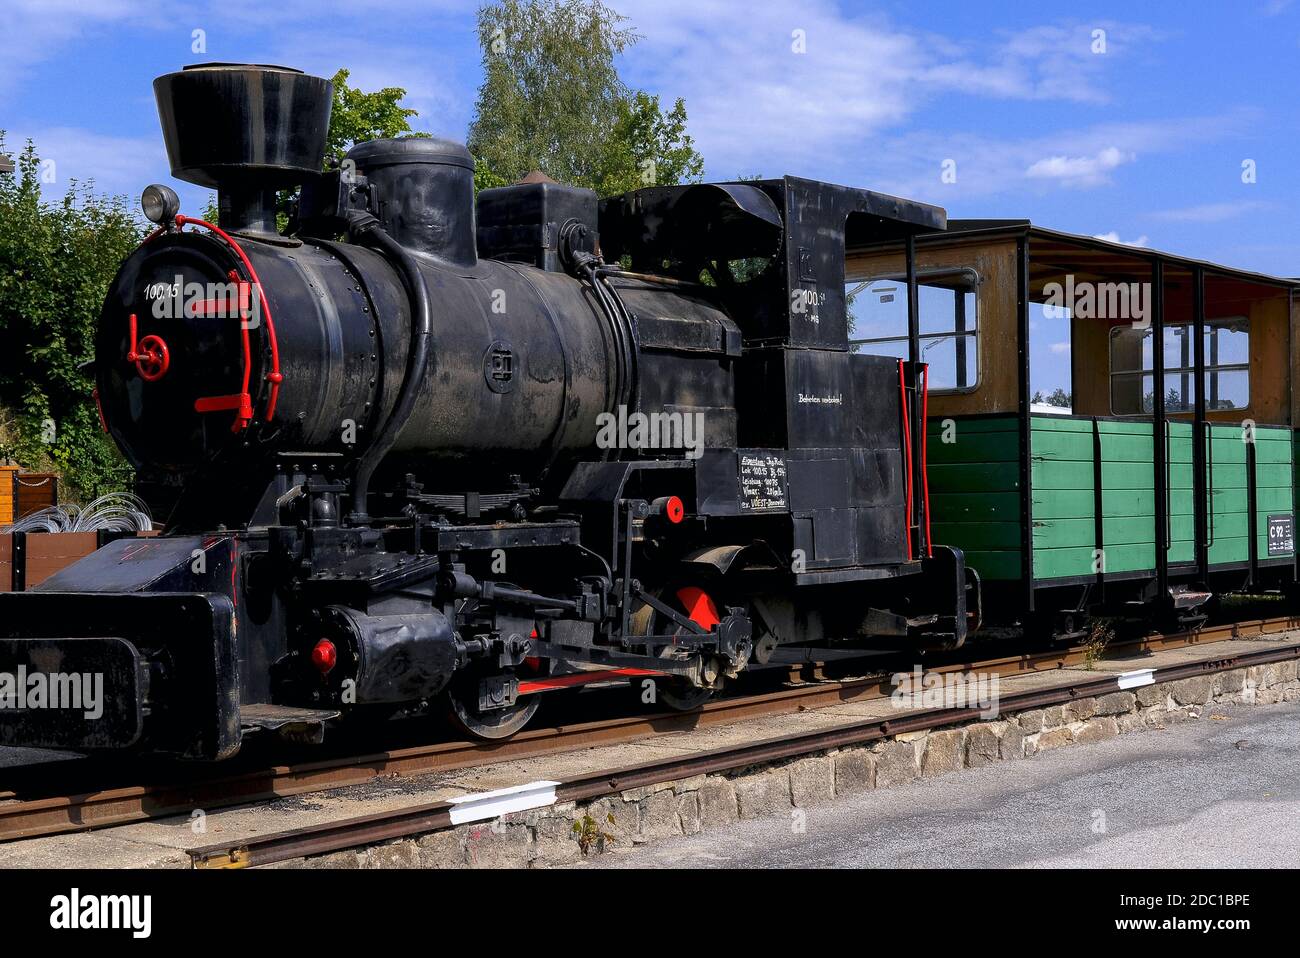 Narrow gauge (790 mm) steam locomotive ÖAM 100.15, built in 1947 and originally used in mining and metals production, pictured in 2008 with two open carriages at Heidenreichstein, Gmünd, Lower Austria.   The locomotive was moved in 2014 from this location, the former north east terminus of the Waldviertelbahn or Waldviertler Schmalspurbahn, to a new home at Milovice in the Czech Republic.  The Waldviertelbahn is a former industrial 760 mm narrow gauge network today preserved and run as a heritage attraction. Stock Photo